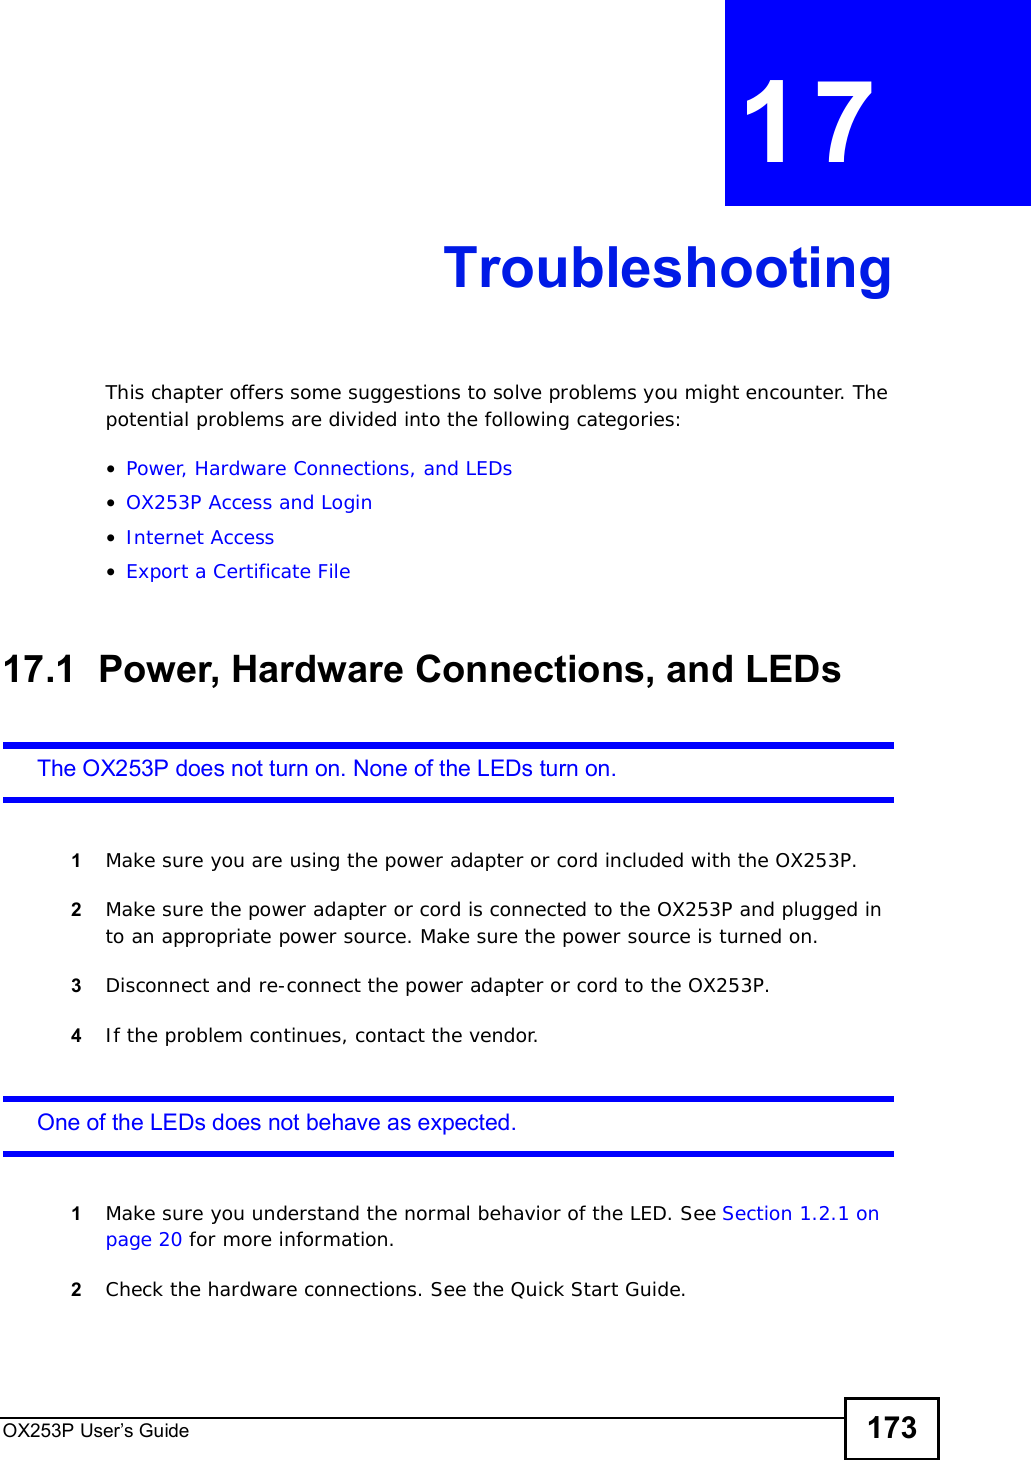 OX253P User’s Guide 173CHAPTER 17TroubleshootingThis chapter offers some suggestions to solve problems you might encounter. The potential problems are divided into the following categories:•Power, Hardware Connections, and LEDs•OX253P Access and Login•Internet Access•Export a Certificate File17.1  Power, Hardware Connections, and LEDsThe OX253P does not turn on. None of the LEDs turn on.1Make sure you are using the power adapter or cord included with the OX253P.2Make sure the power adapter or cord is connected to the OX253P and plugged in to an appropriate power source. Make sure the power source is turned on.3Disconnect and re-connect the power adapter or cord to the OX253P.4If the problem continues, contact the vendor.One of the LEDs does not behave as expected.1Make sure you understand the normal behavior of the LED. See Section 1.2.1 on page 20 for more information.2Check the hardware connections. See the Quick Start Guide.